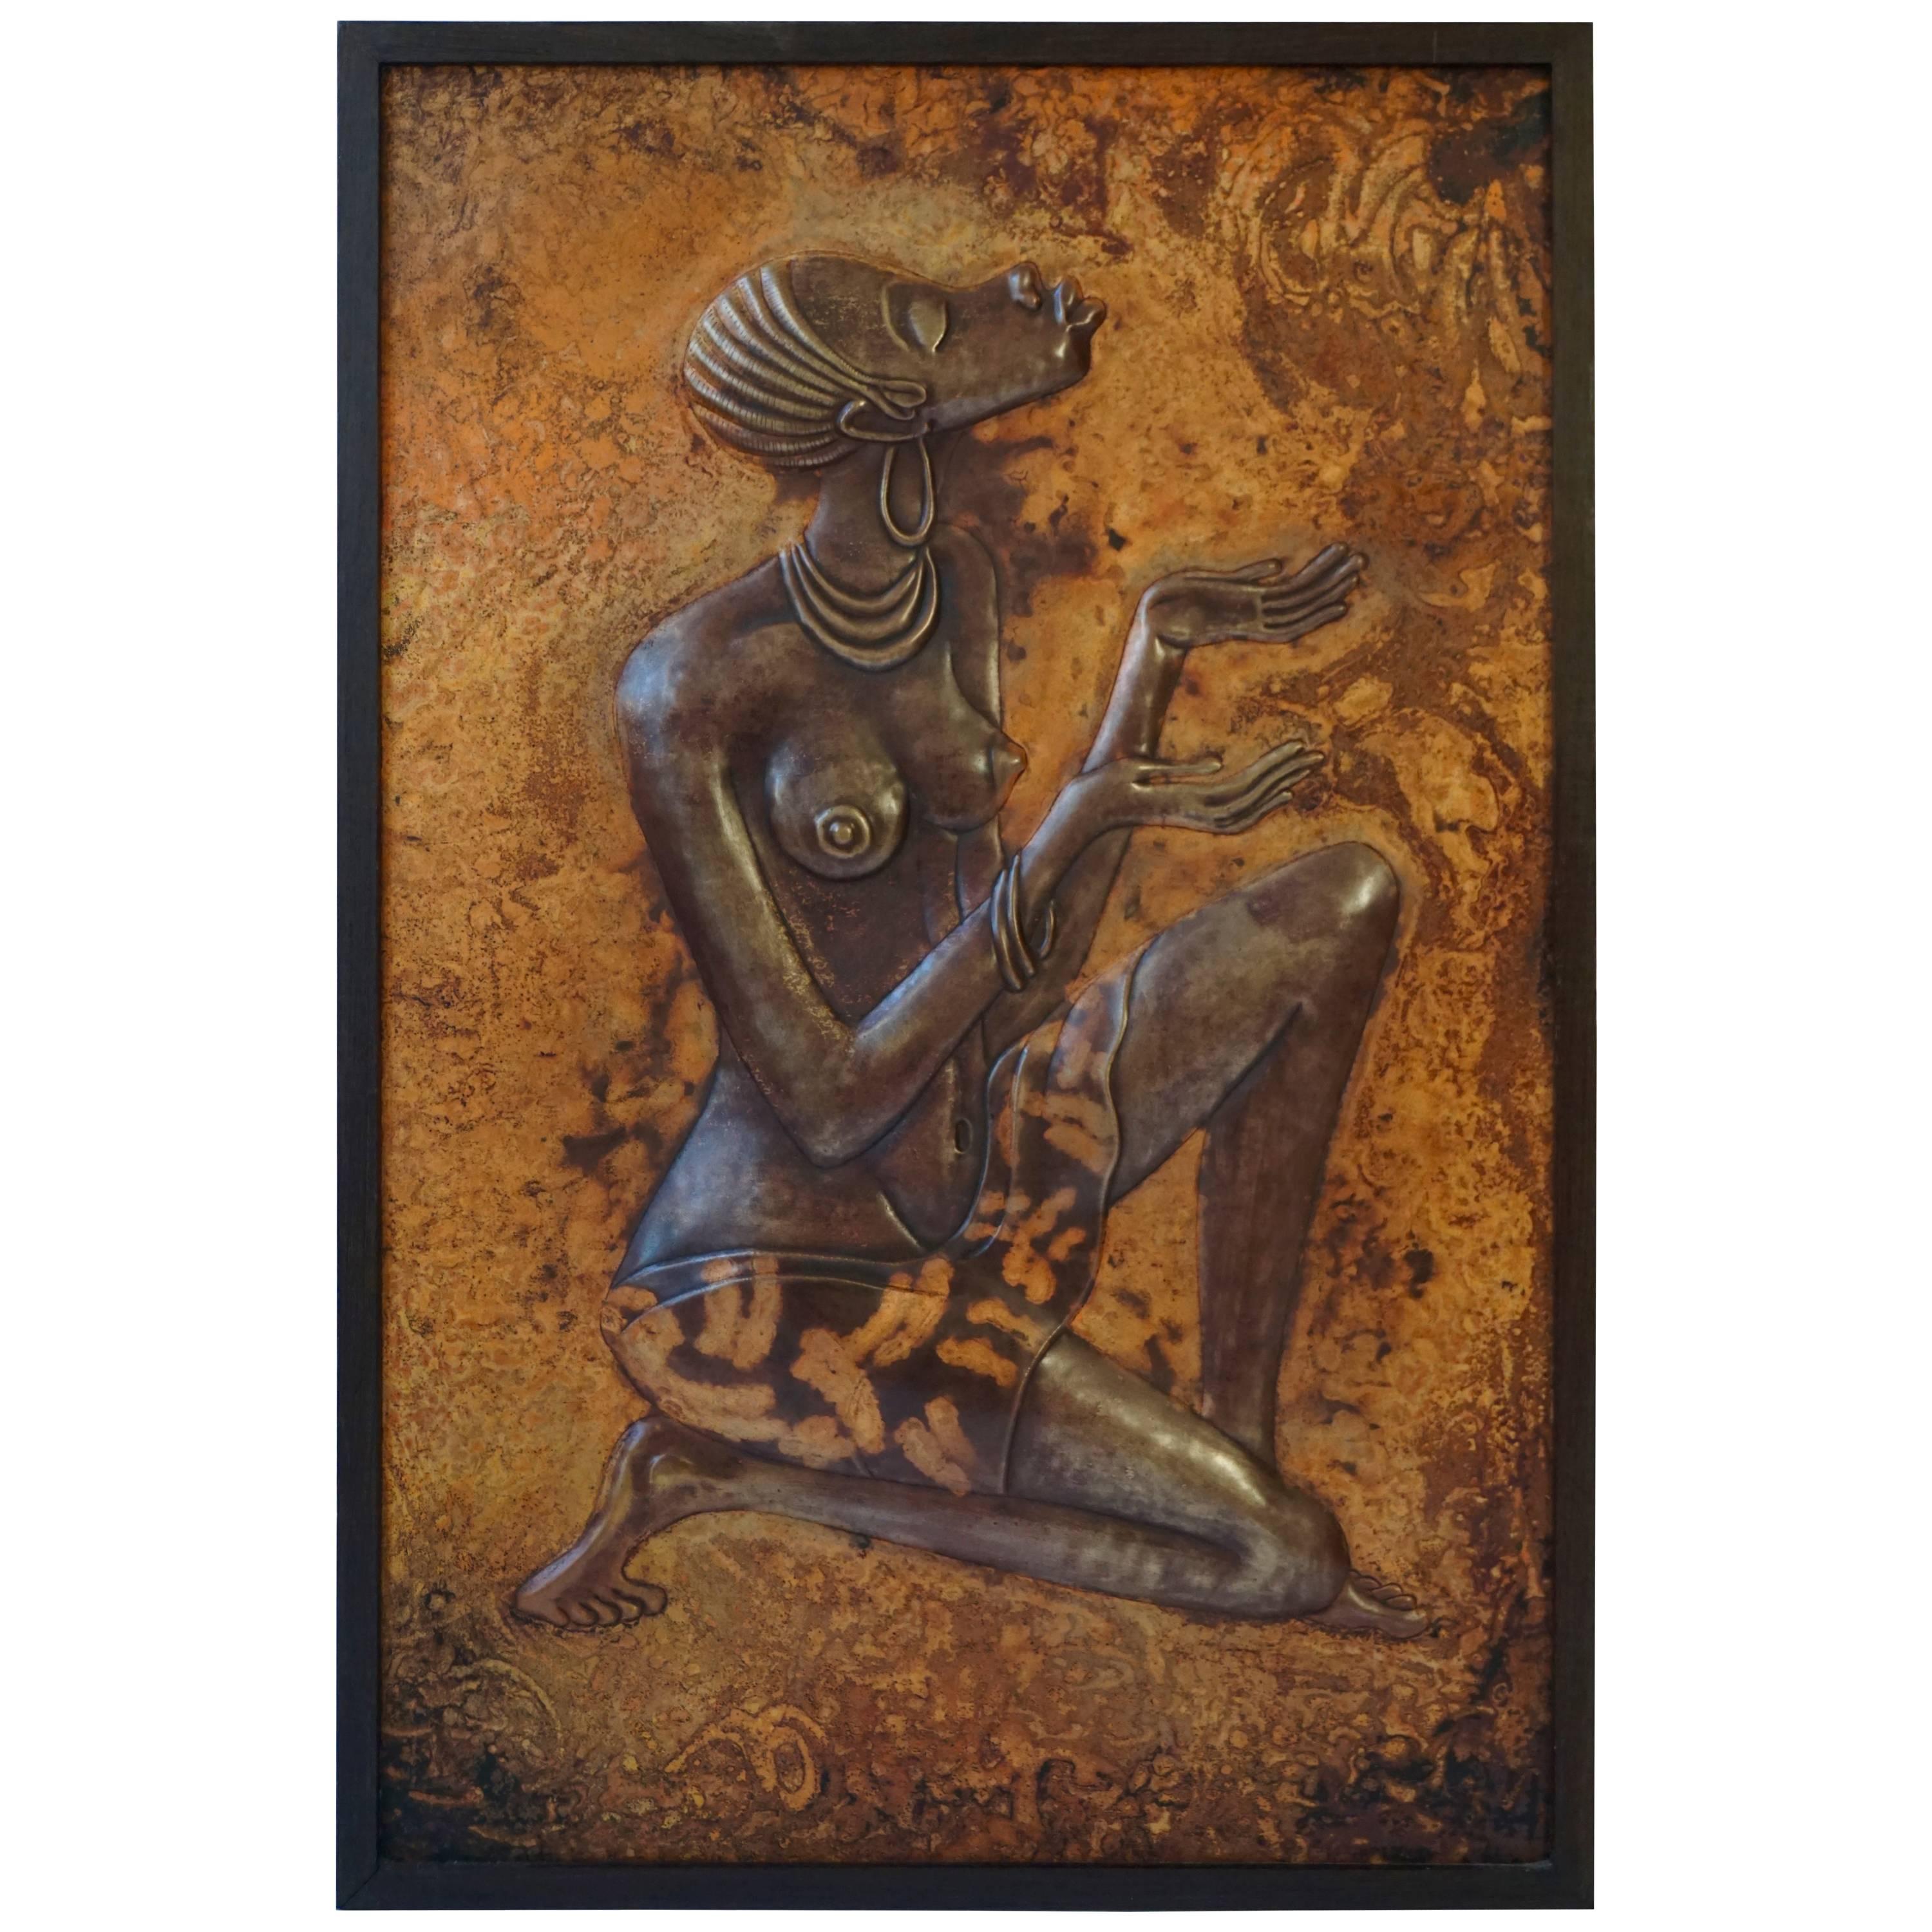 Hammered Copper Wall Relief Sculpture Panel with African Woman